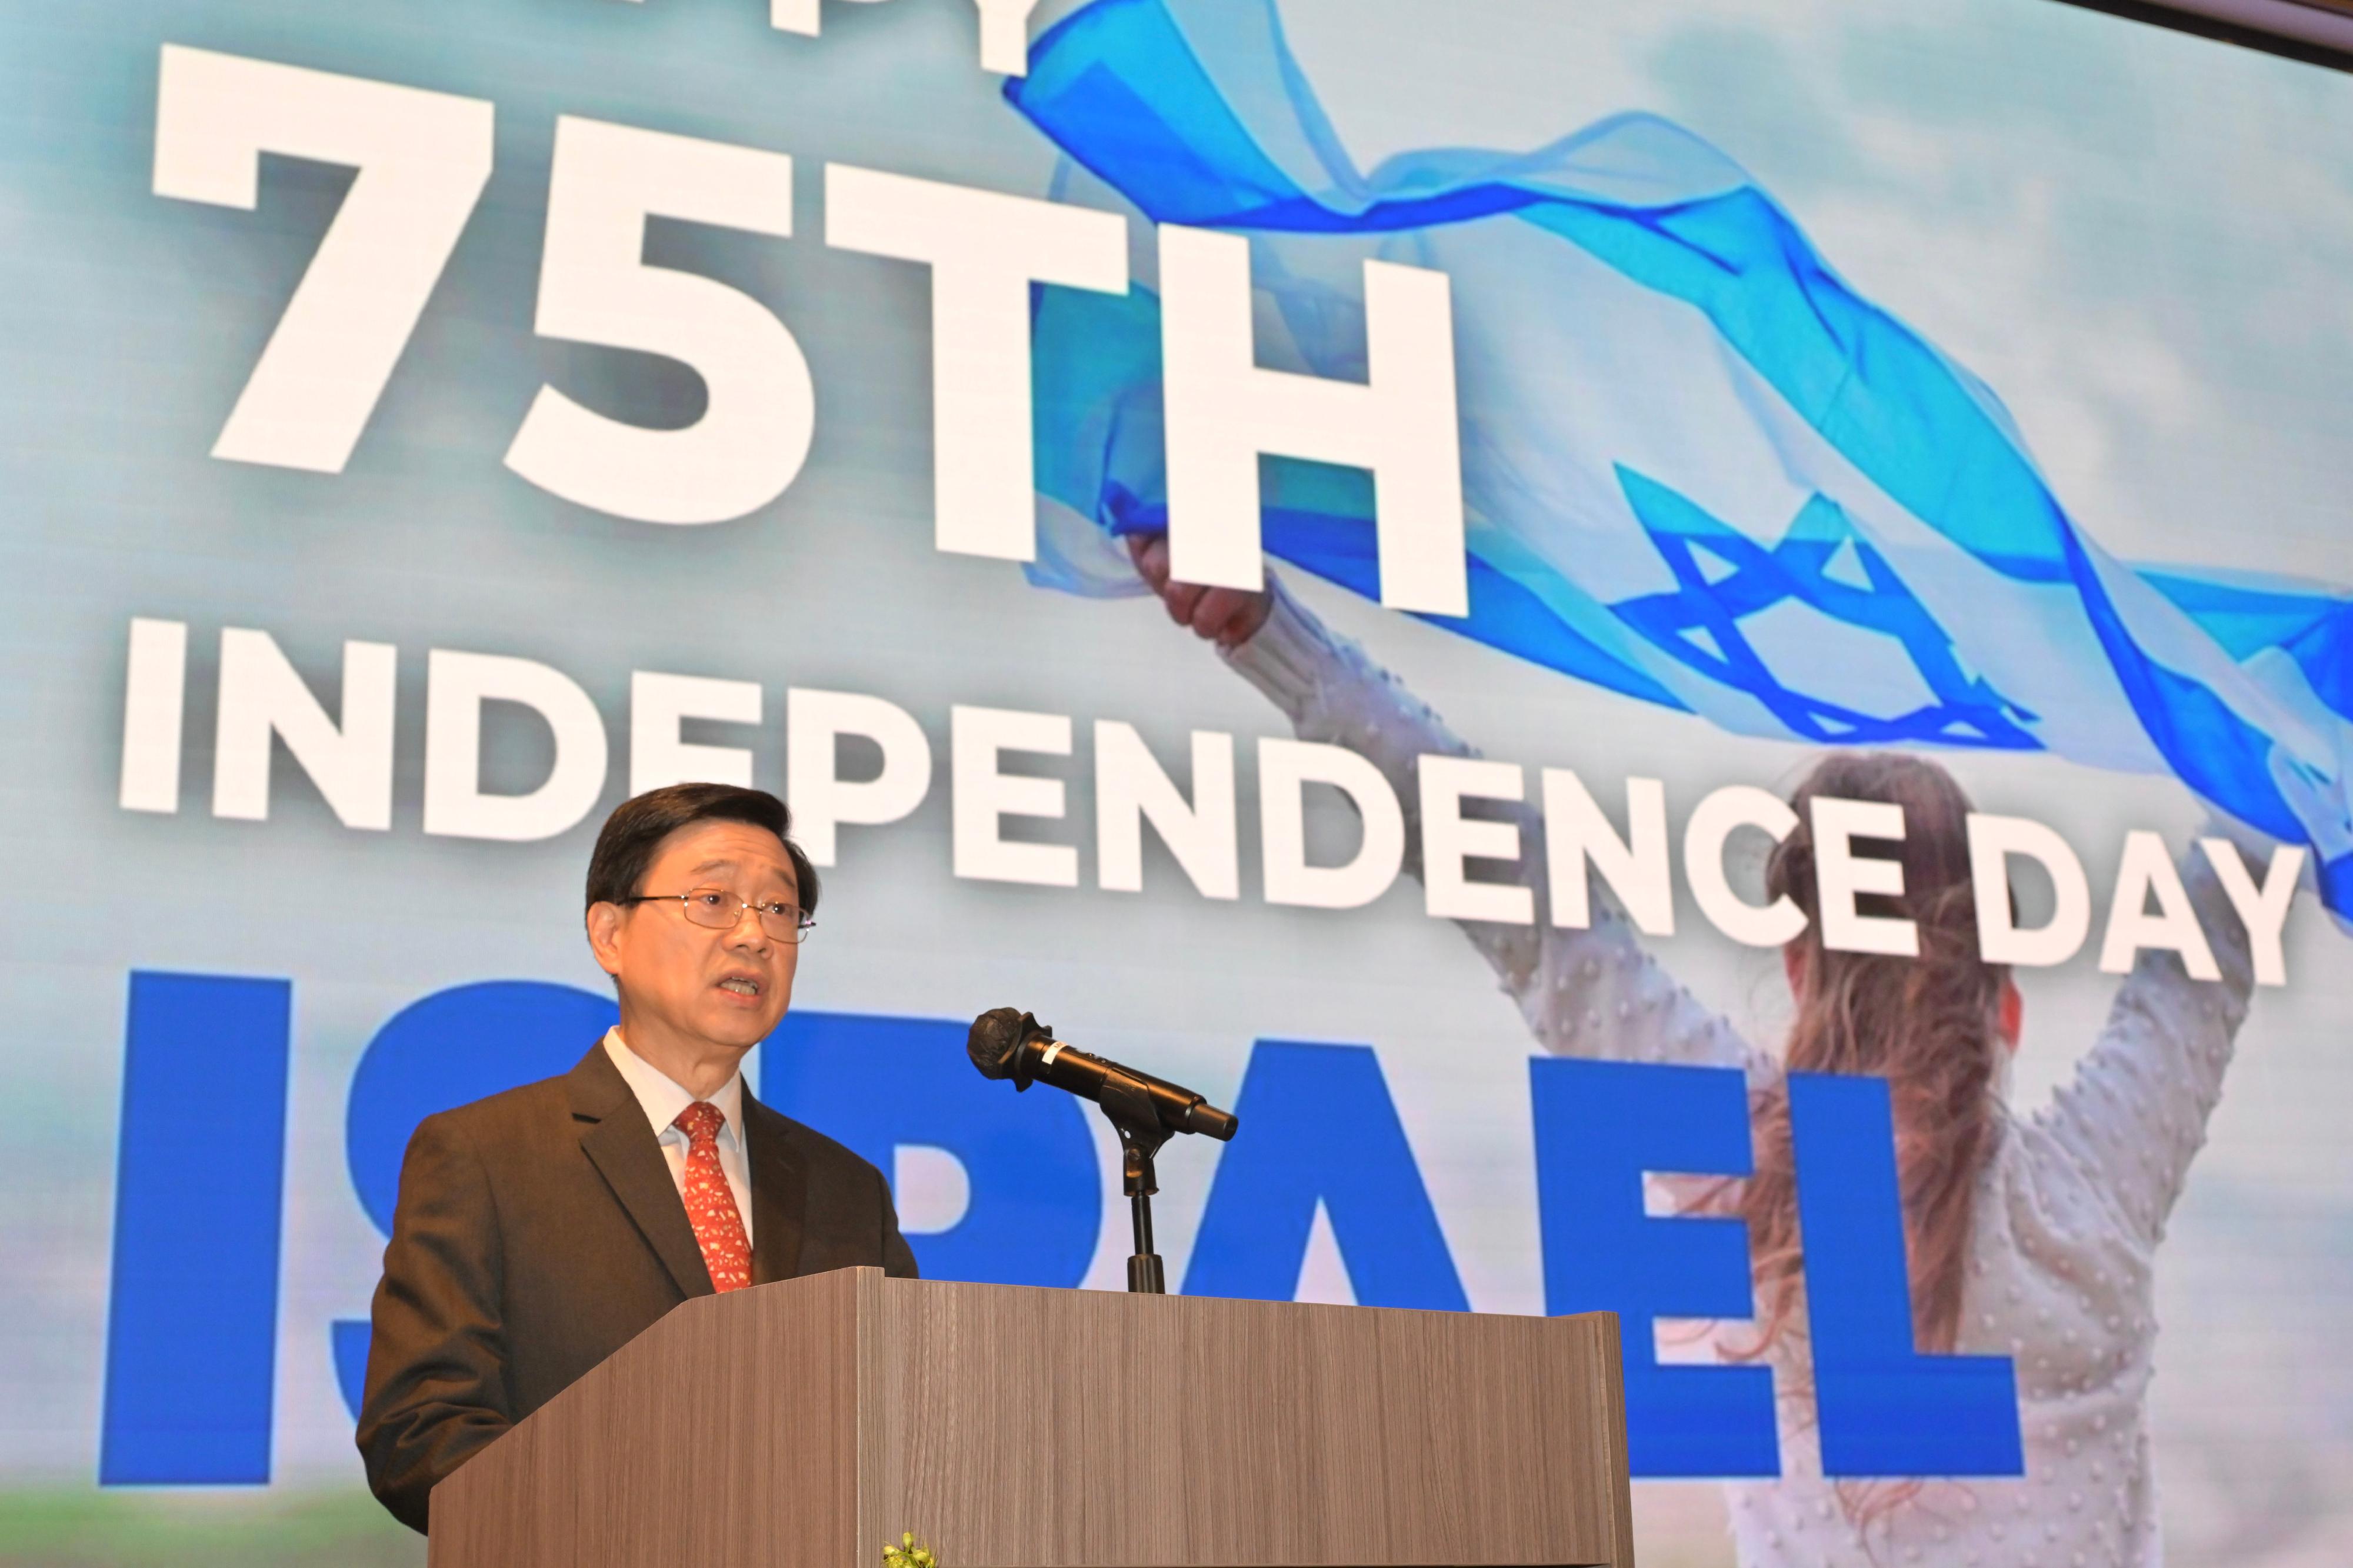 The Chief Executive, Mr John Lee, speaks at the reception in celebration of the 75th Independence Day of the State of Israel today (June 20).